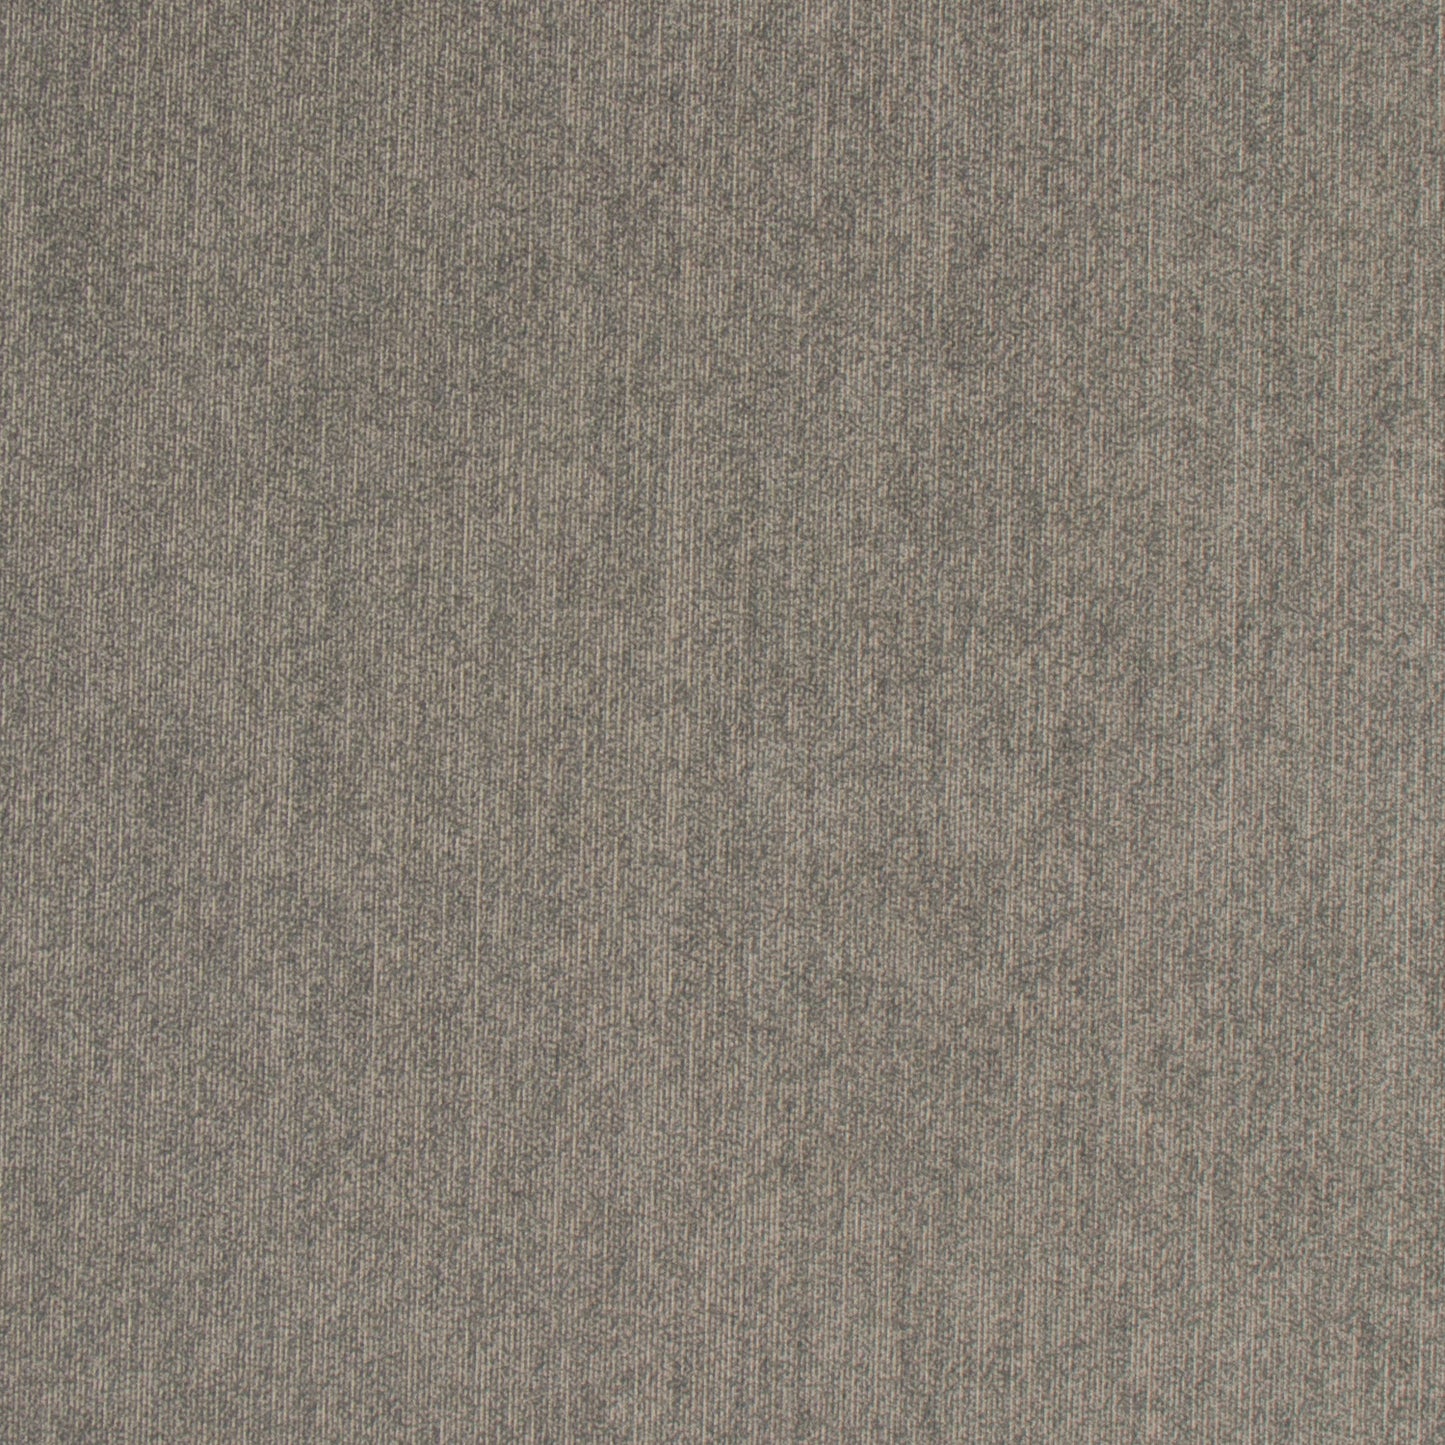 Poetic Upholstery Steeple Grey - To Be Discontinued